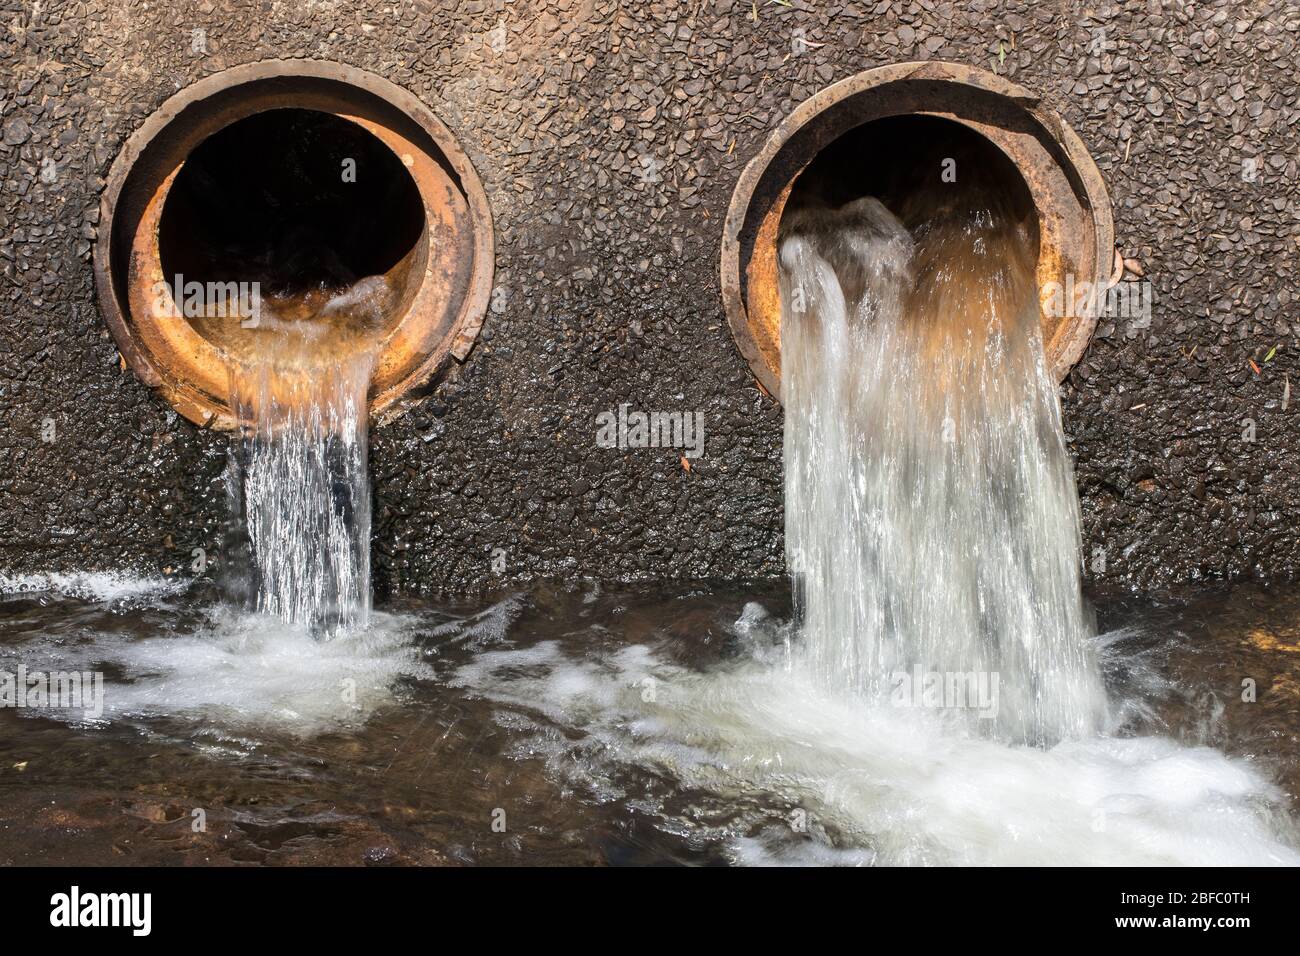 Water flowing from pipes under causeway on road Stock Photo